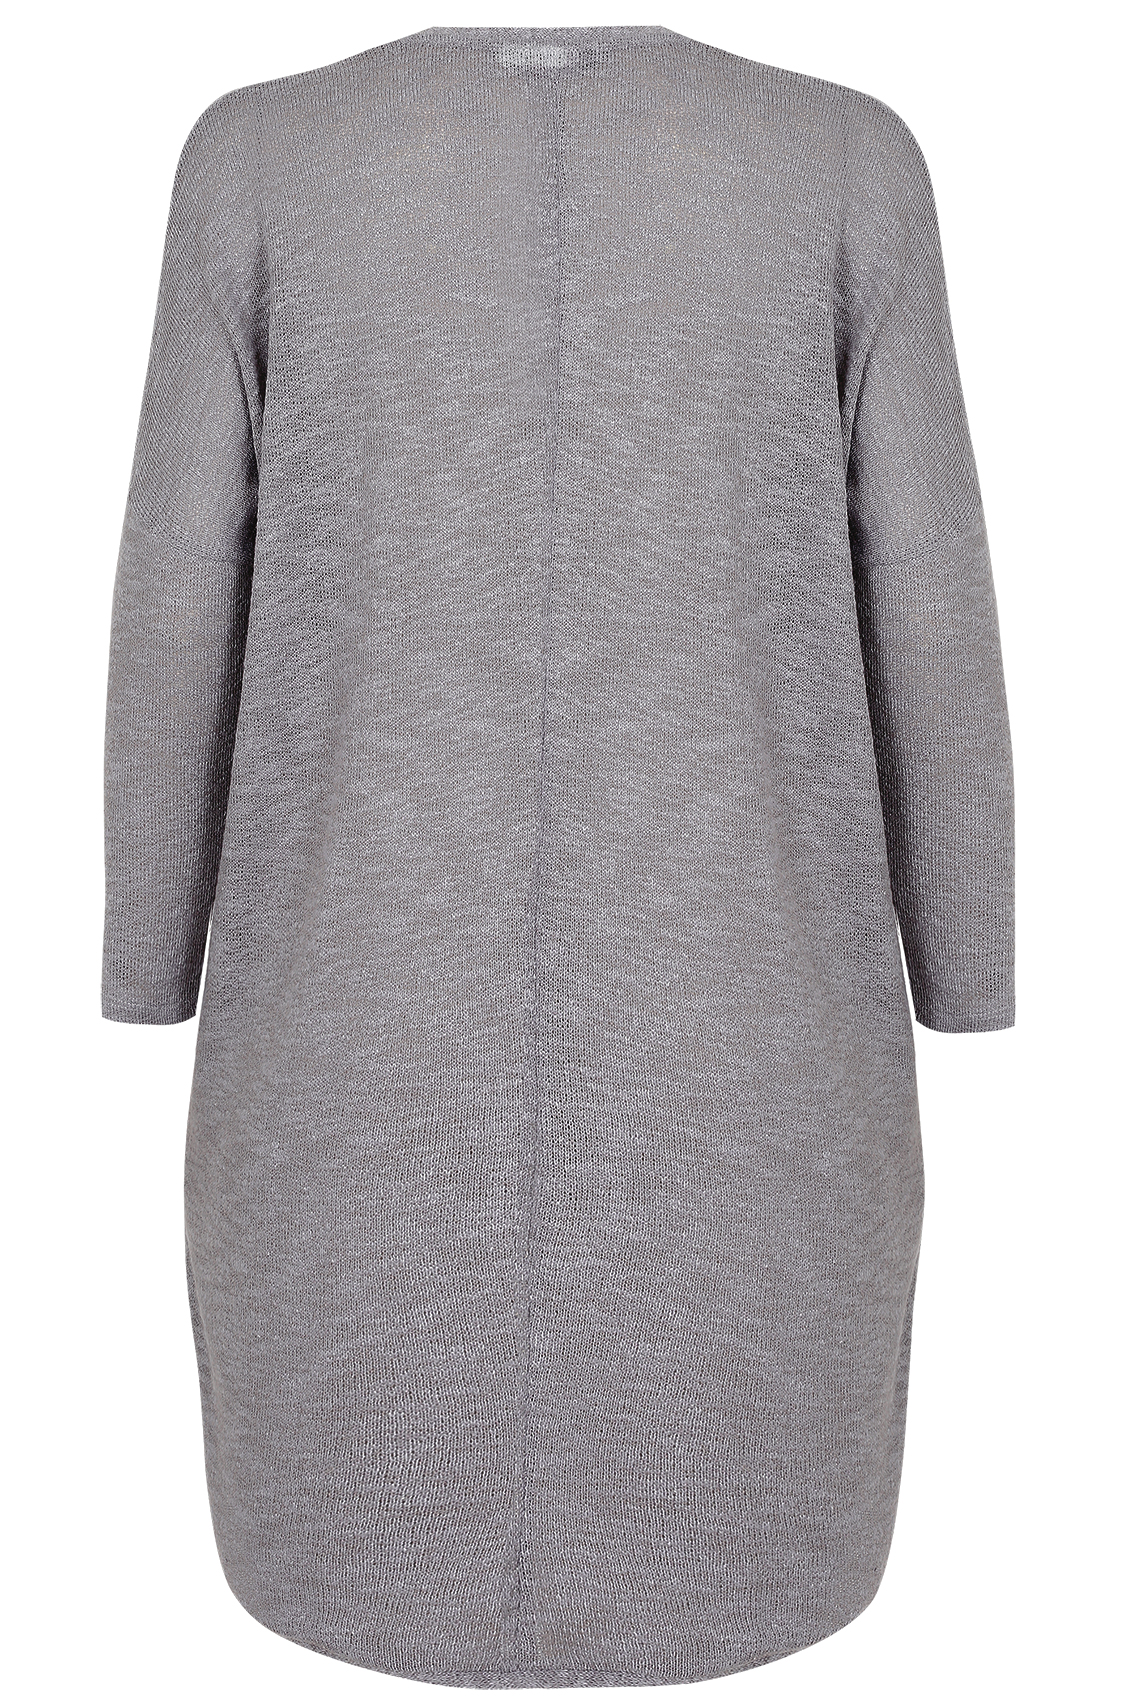 Grey Knitted Longline Cocoon Cardigan With Drop Shoulder Sleeves, Plus ...